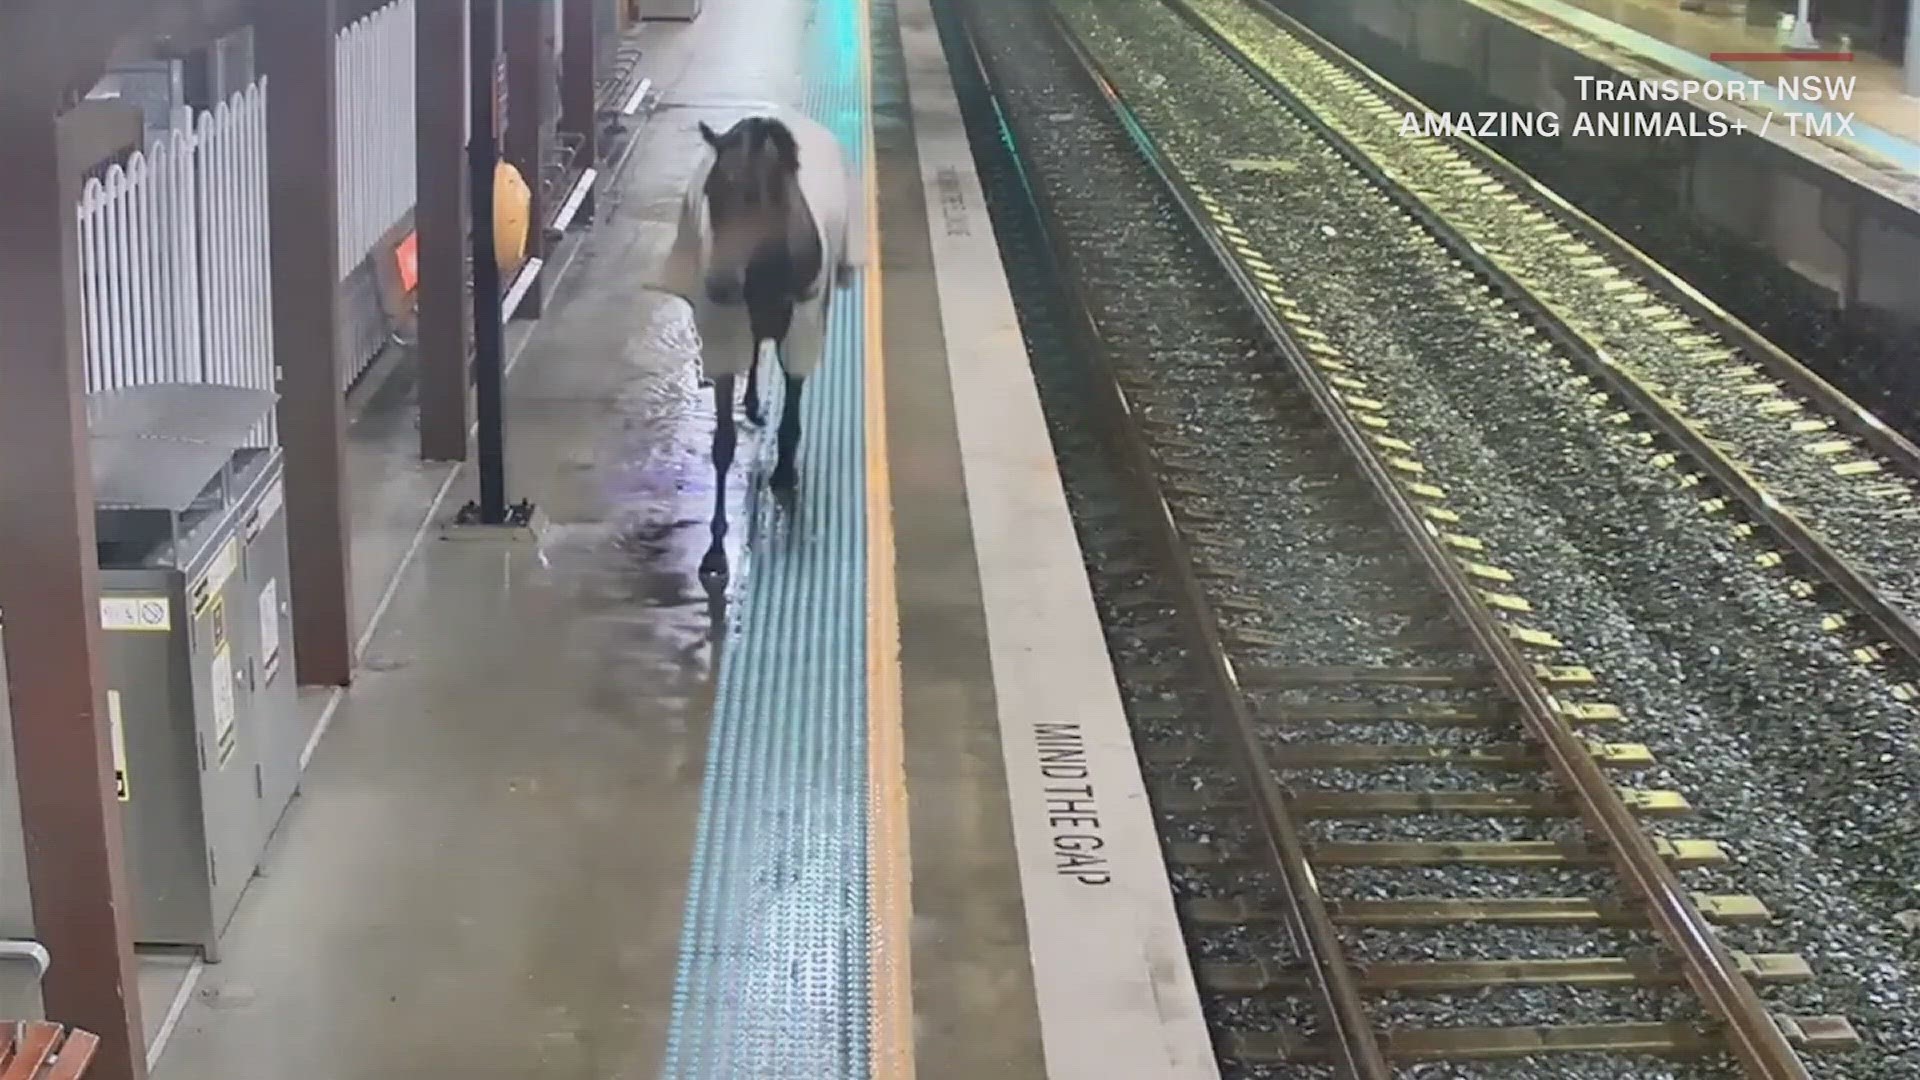 An escaped horse made its way onto a commuter train's platform in Australia before being safely rounded up by its owners.